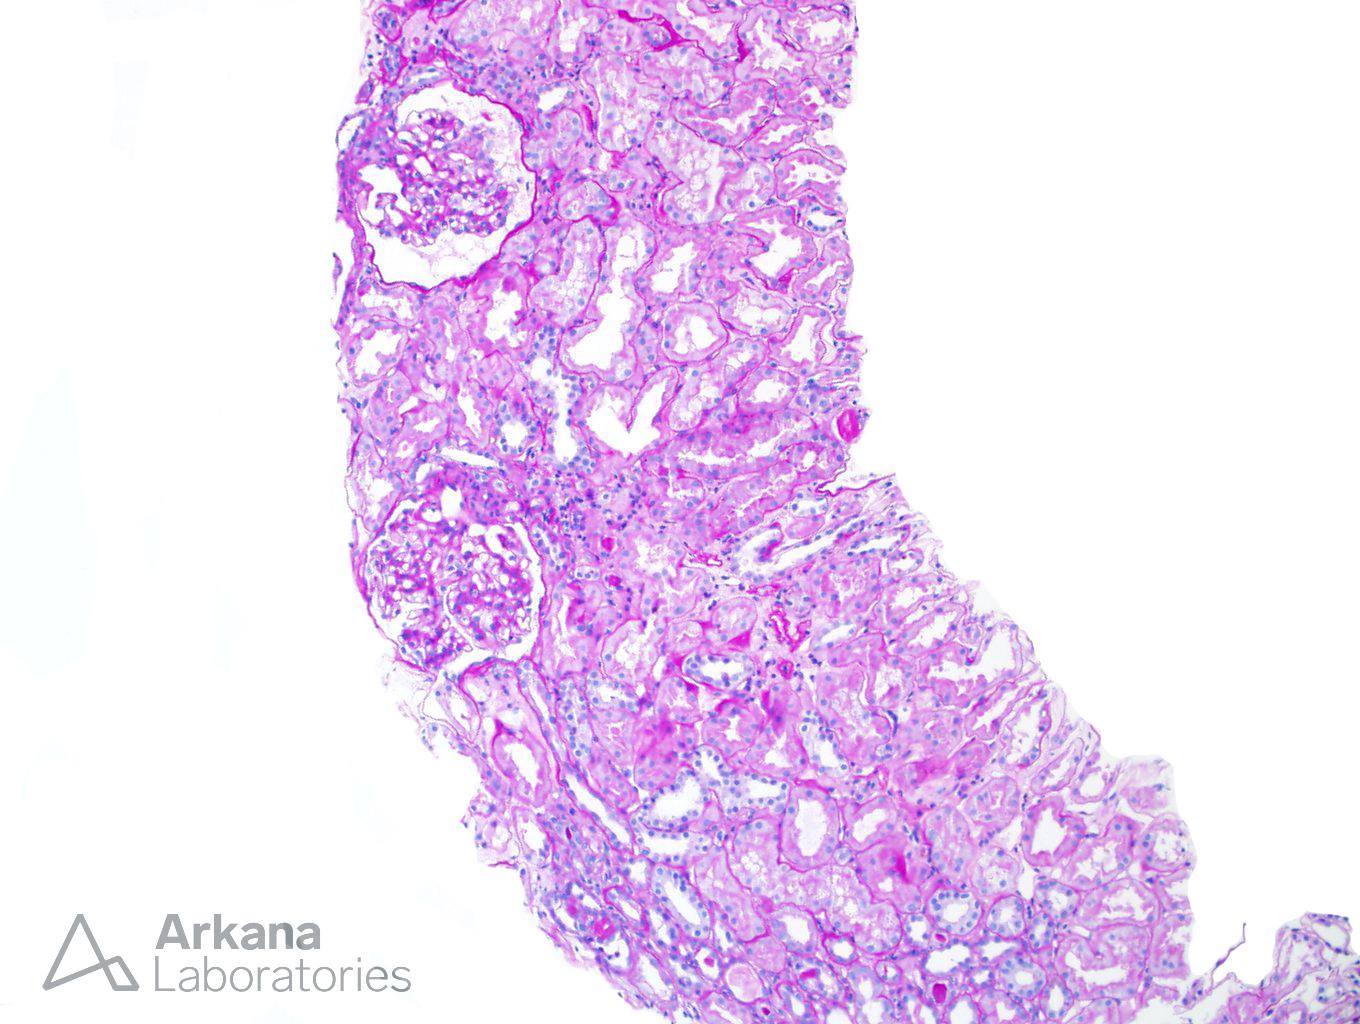 renal cortex from renal biopsy showing Light Chain Deposition Disease